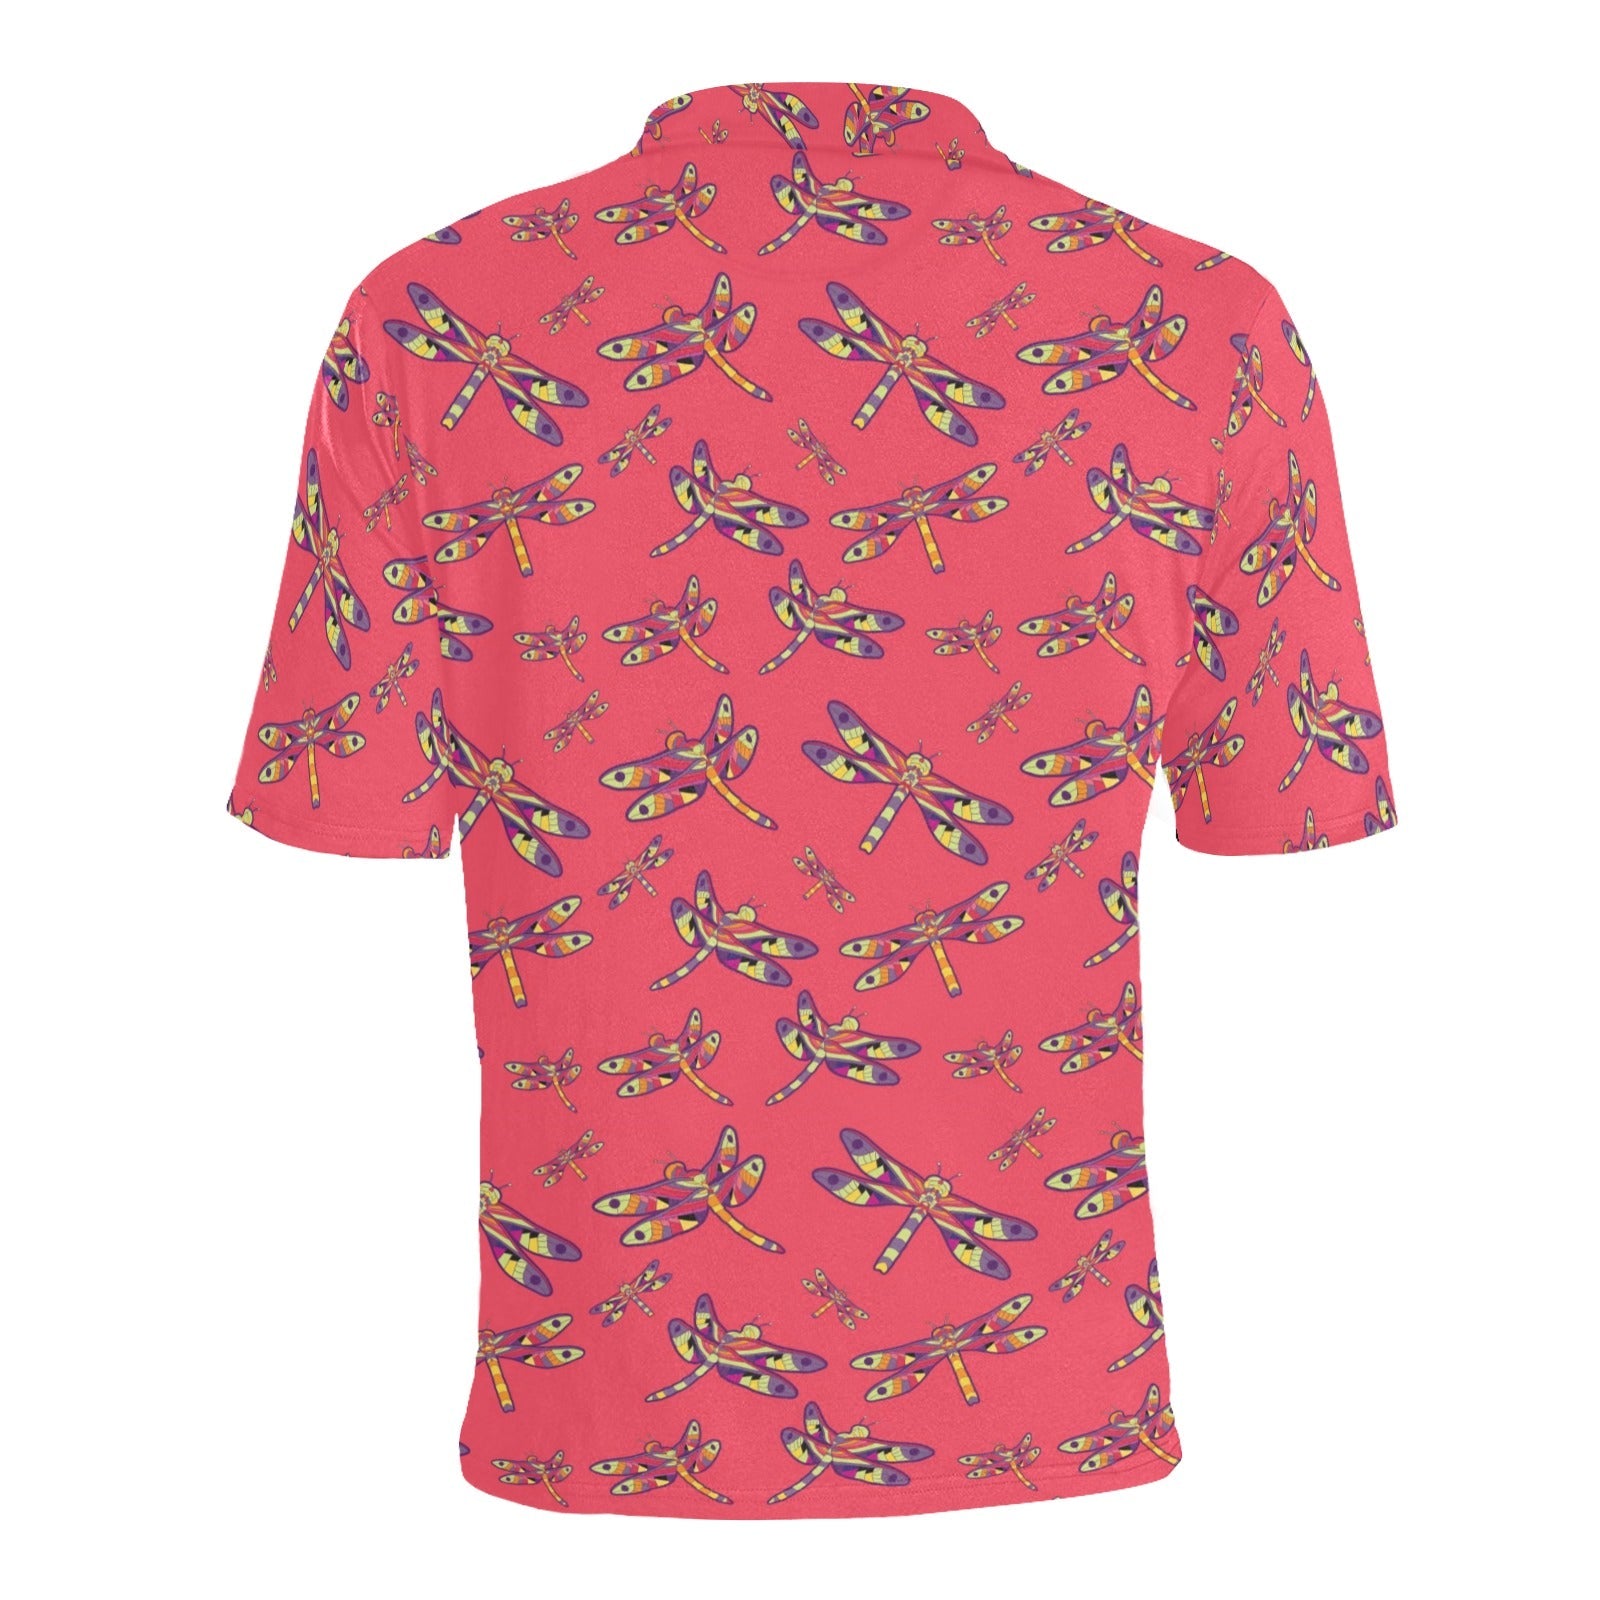 The Gathering Men's All Over Print Polo Shirt (Model T55) Men's Polo Shirt (Model T55) e-joyer 